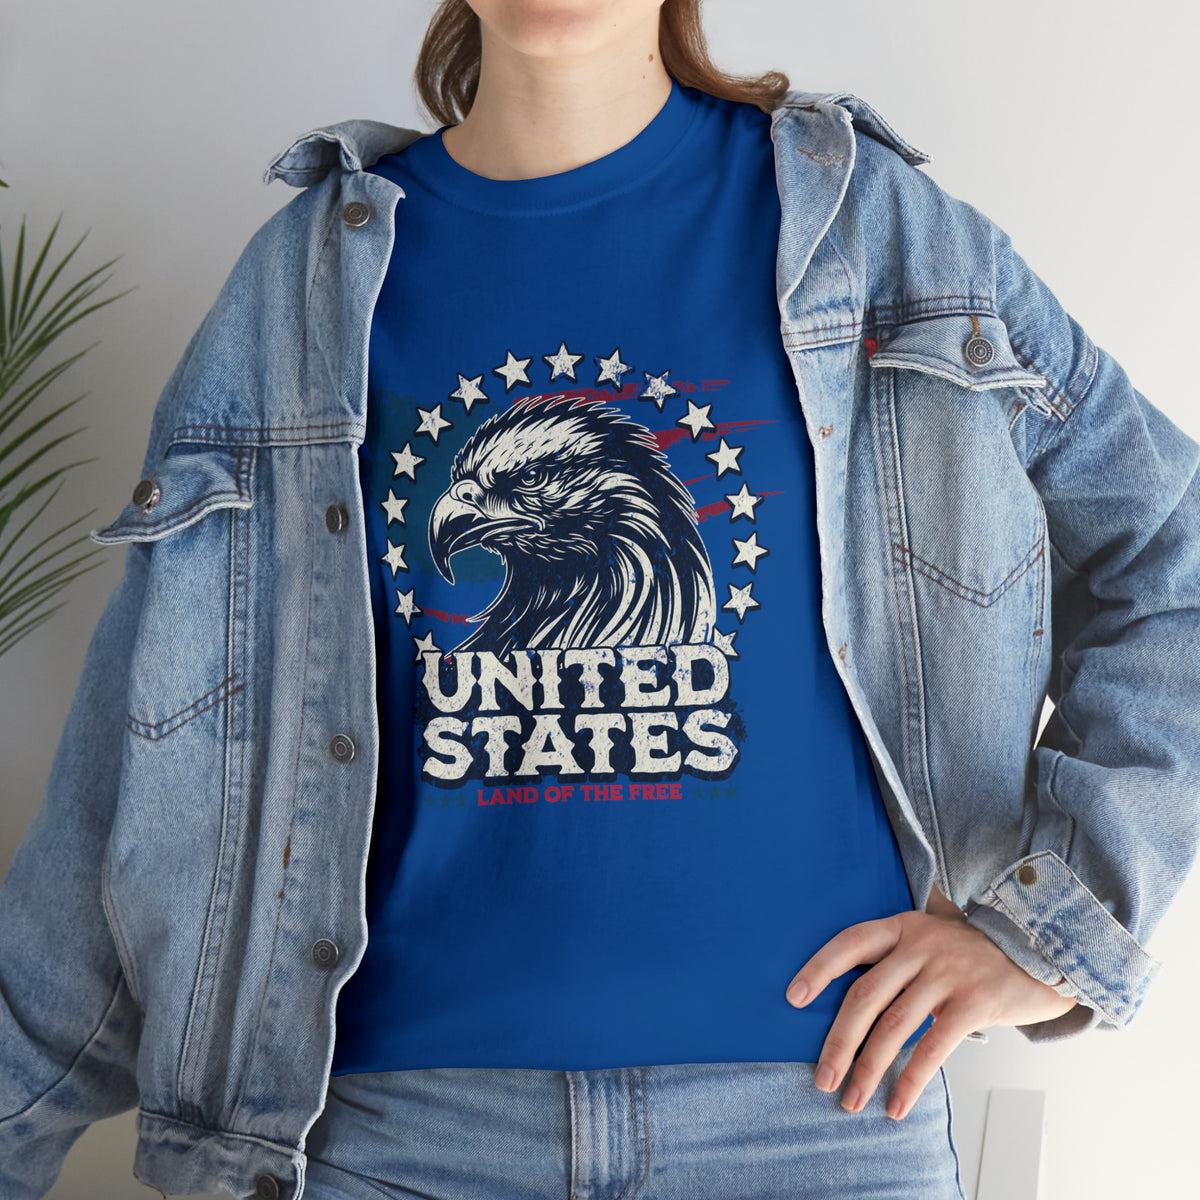 United States - Land of the Free T-Shirt